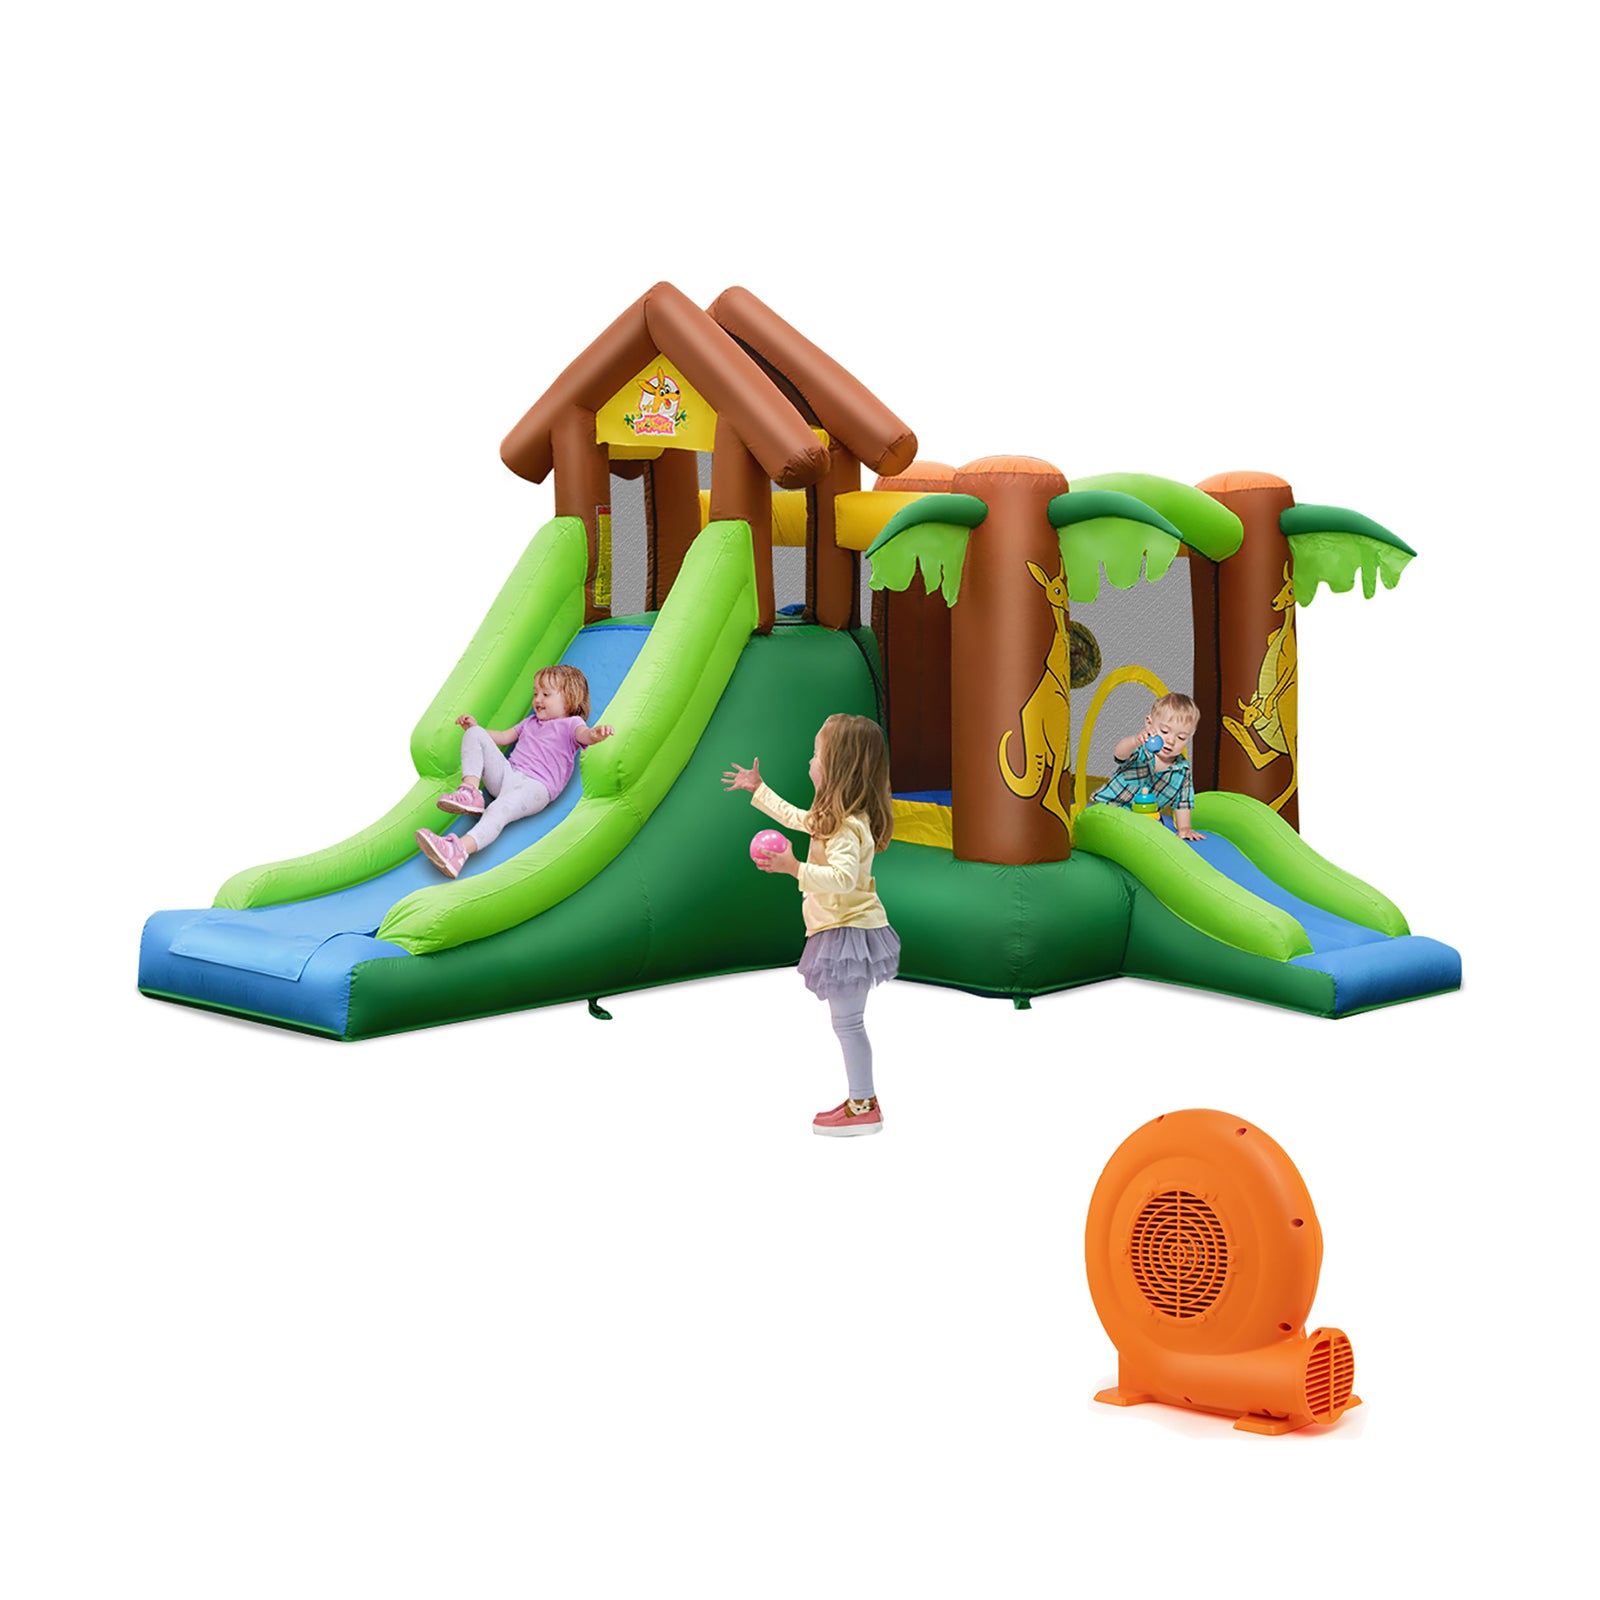 Quick Inflation and Deflation: Equipped with a 750W UL certified air blower, our inflatable jumping castle can be inflated within minutes and easily deflated through a long air outlet tube. Additionally, it can be folded into a compact size for effortless storage.